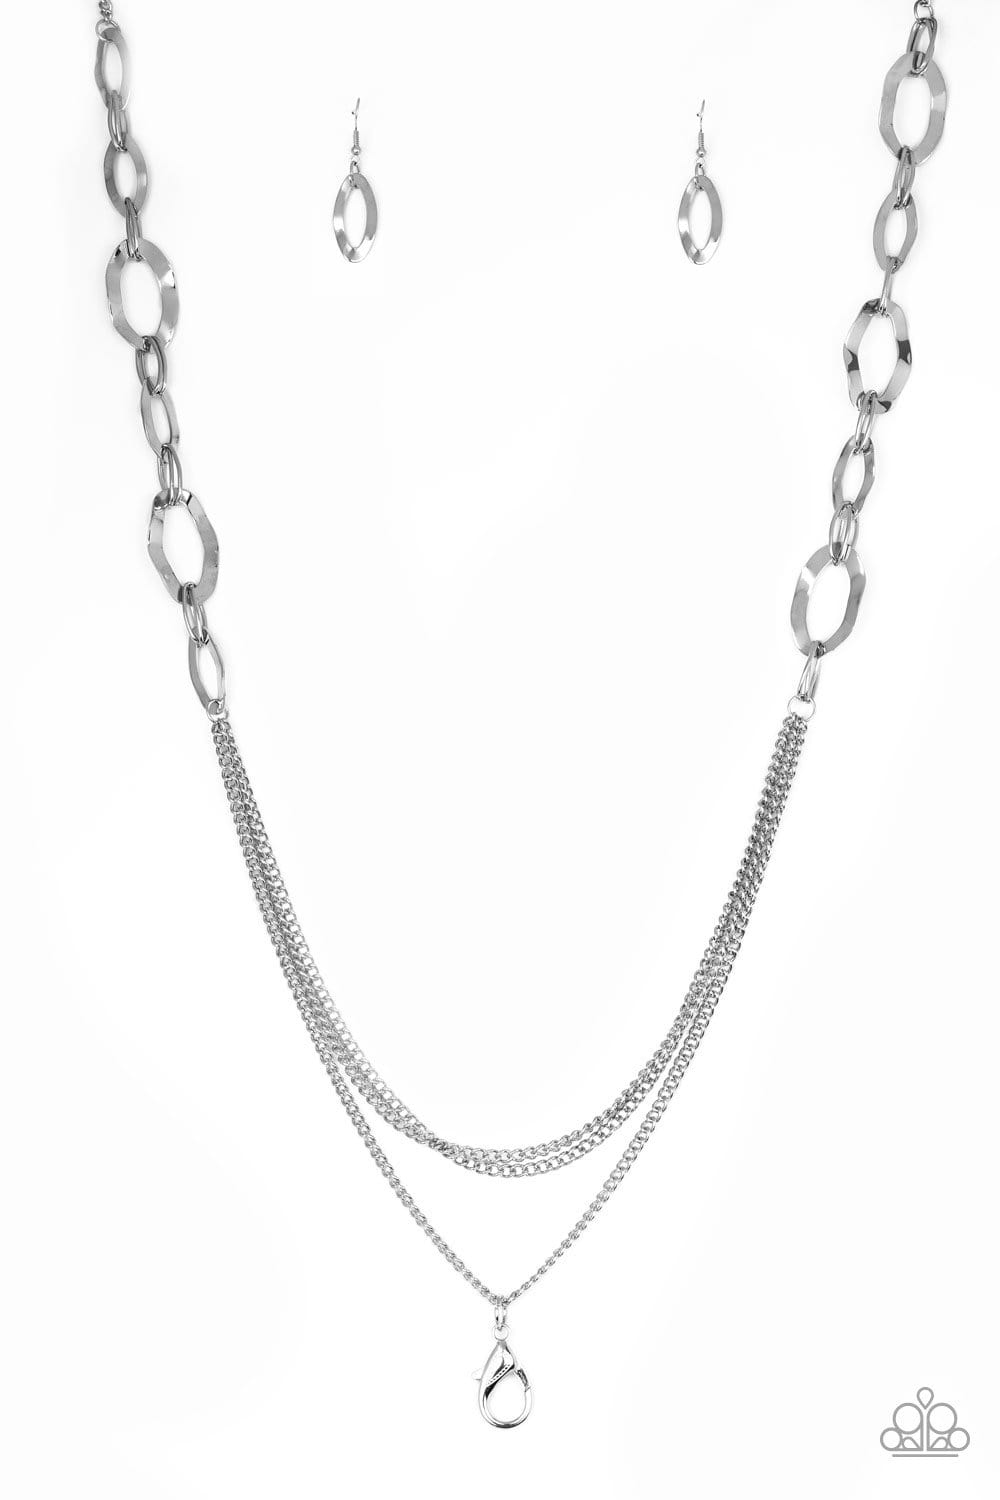 Paparazzi: Street Beat - Silver Chain Necklace - Jewels N’ Thingz Boutique